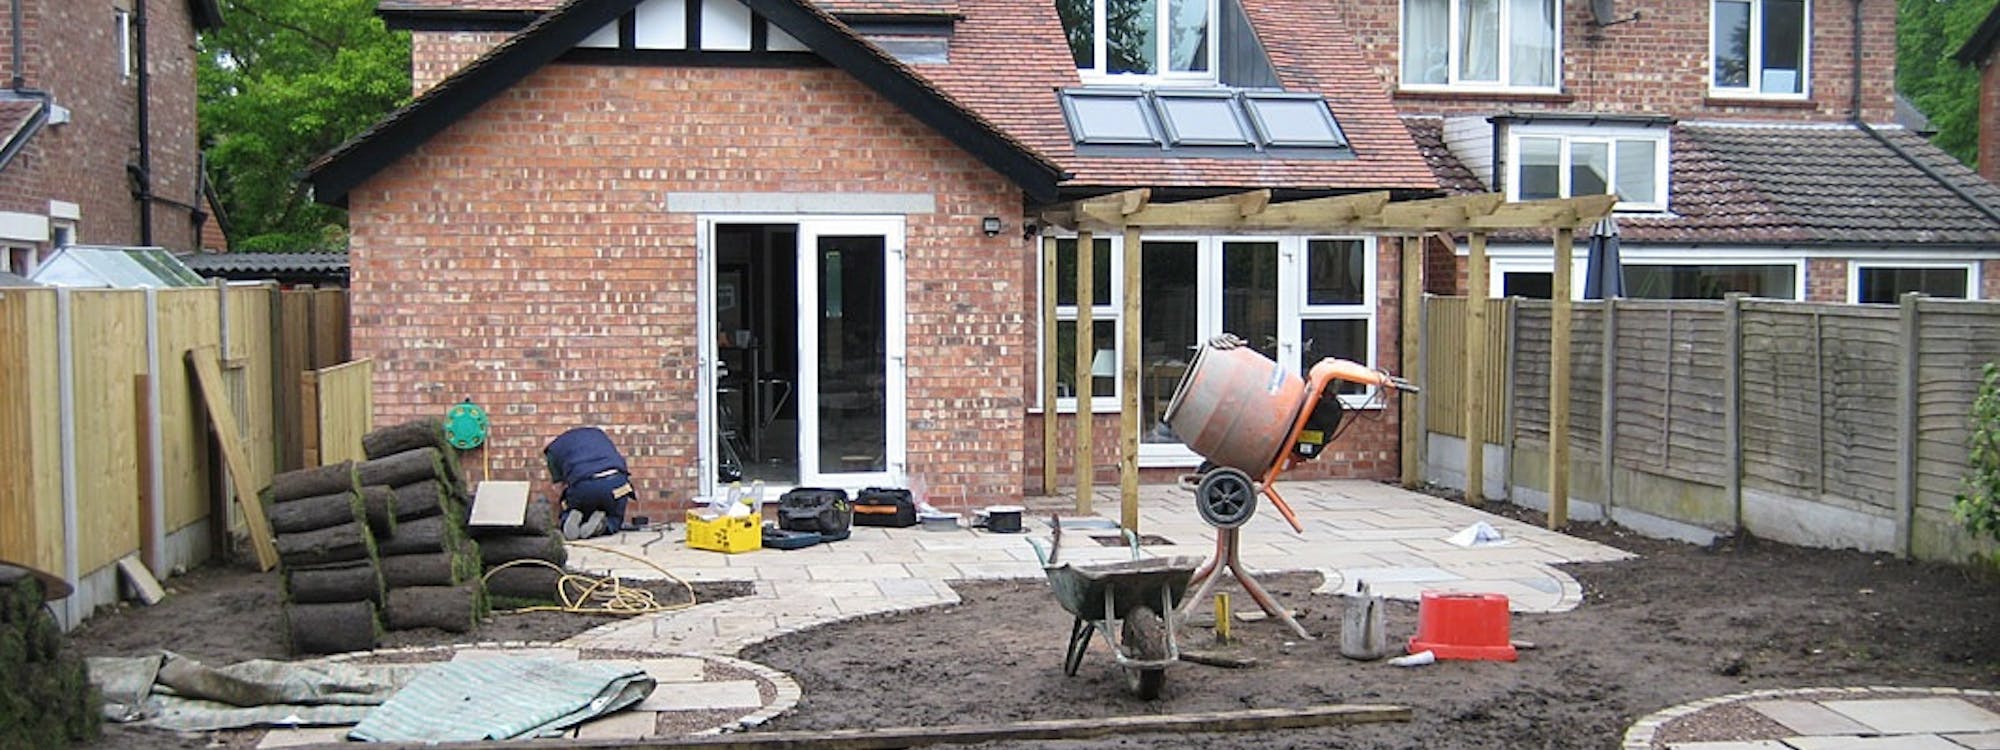 external improvements - ground works designed, supplied, project managed & installed